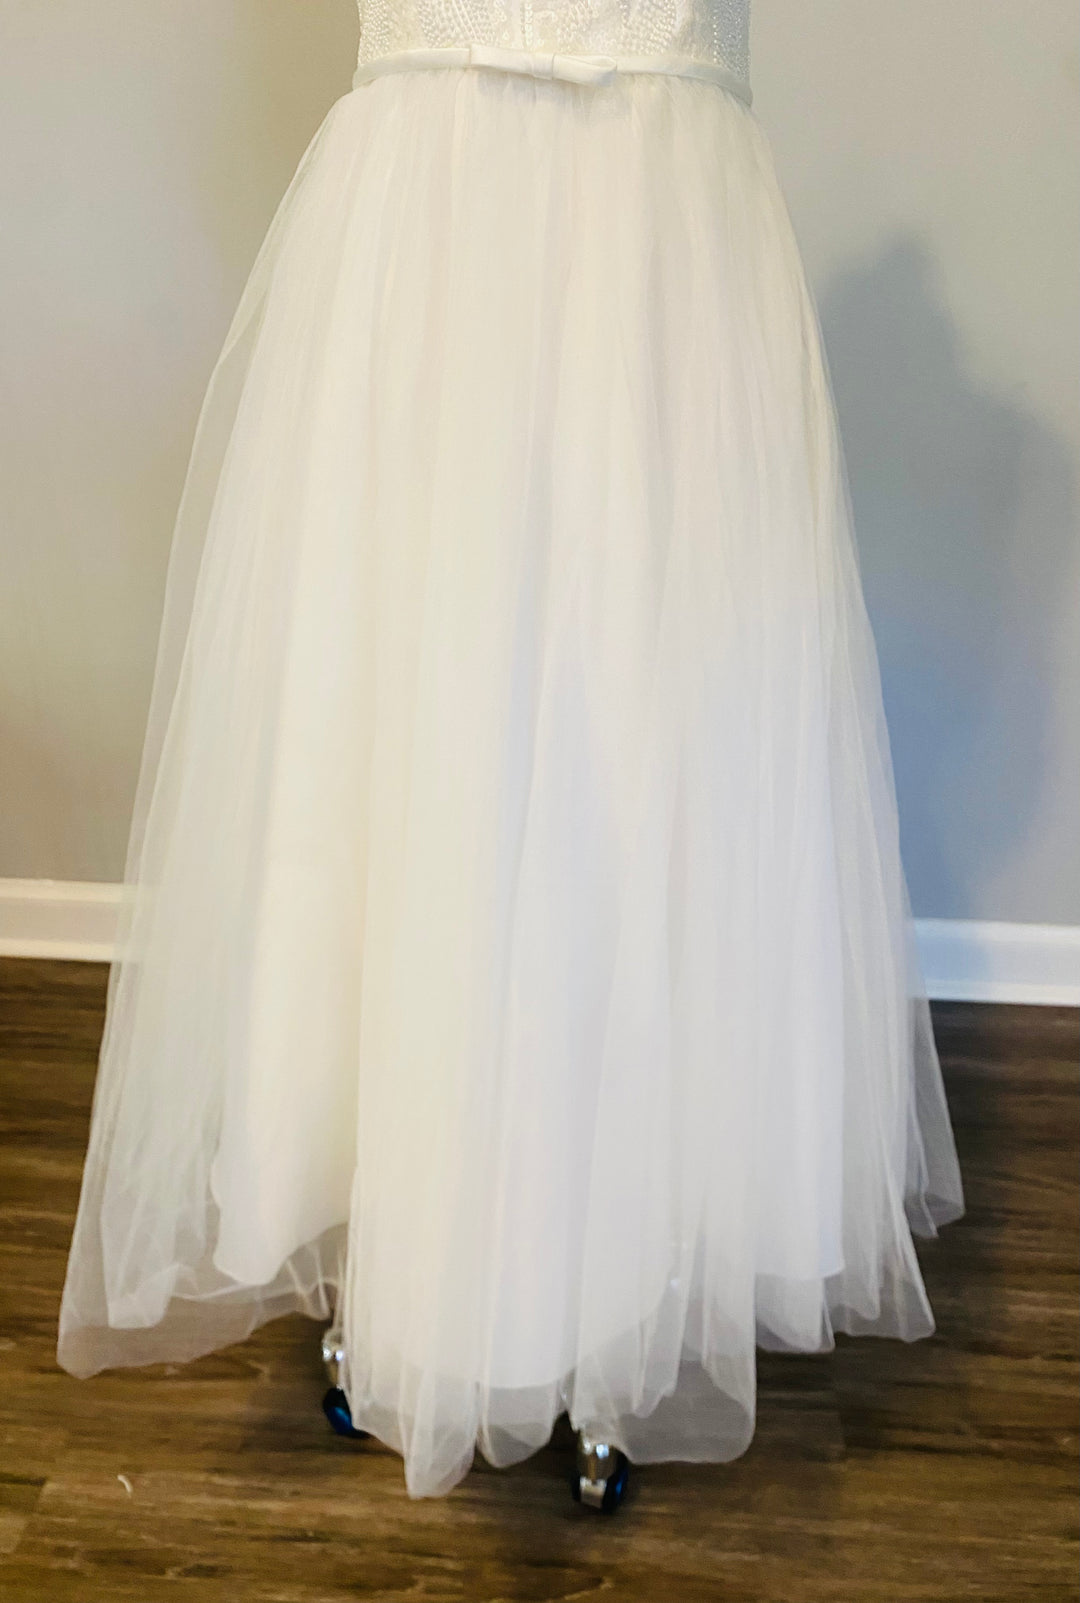 Ballerina Length Ballgown by Enchanting Style 116141 Size 14